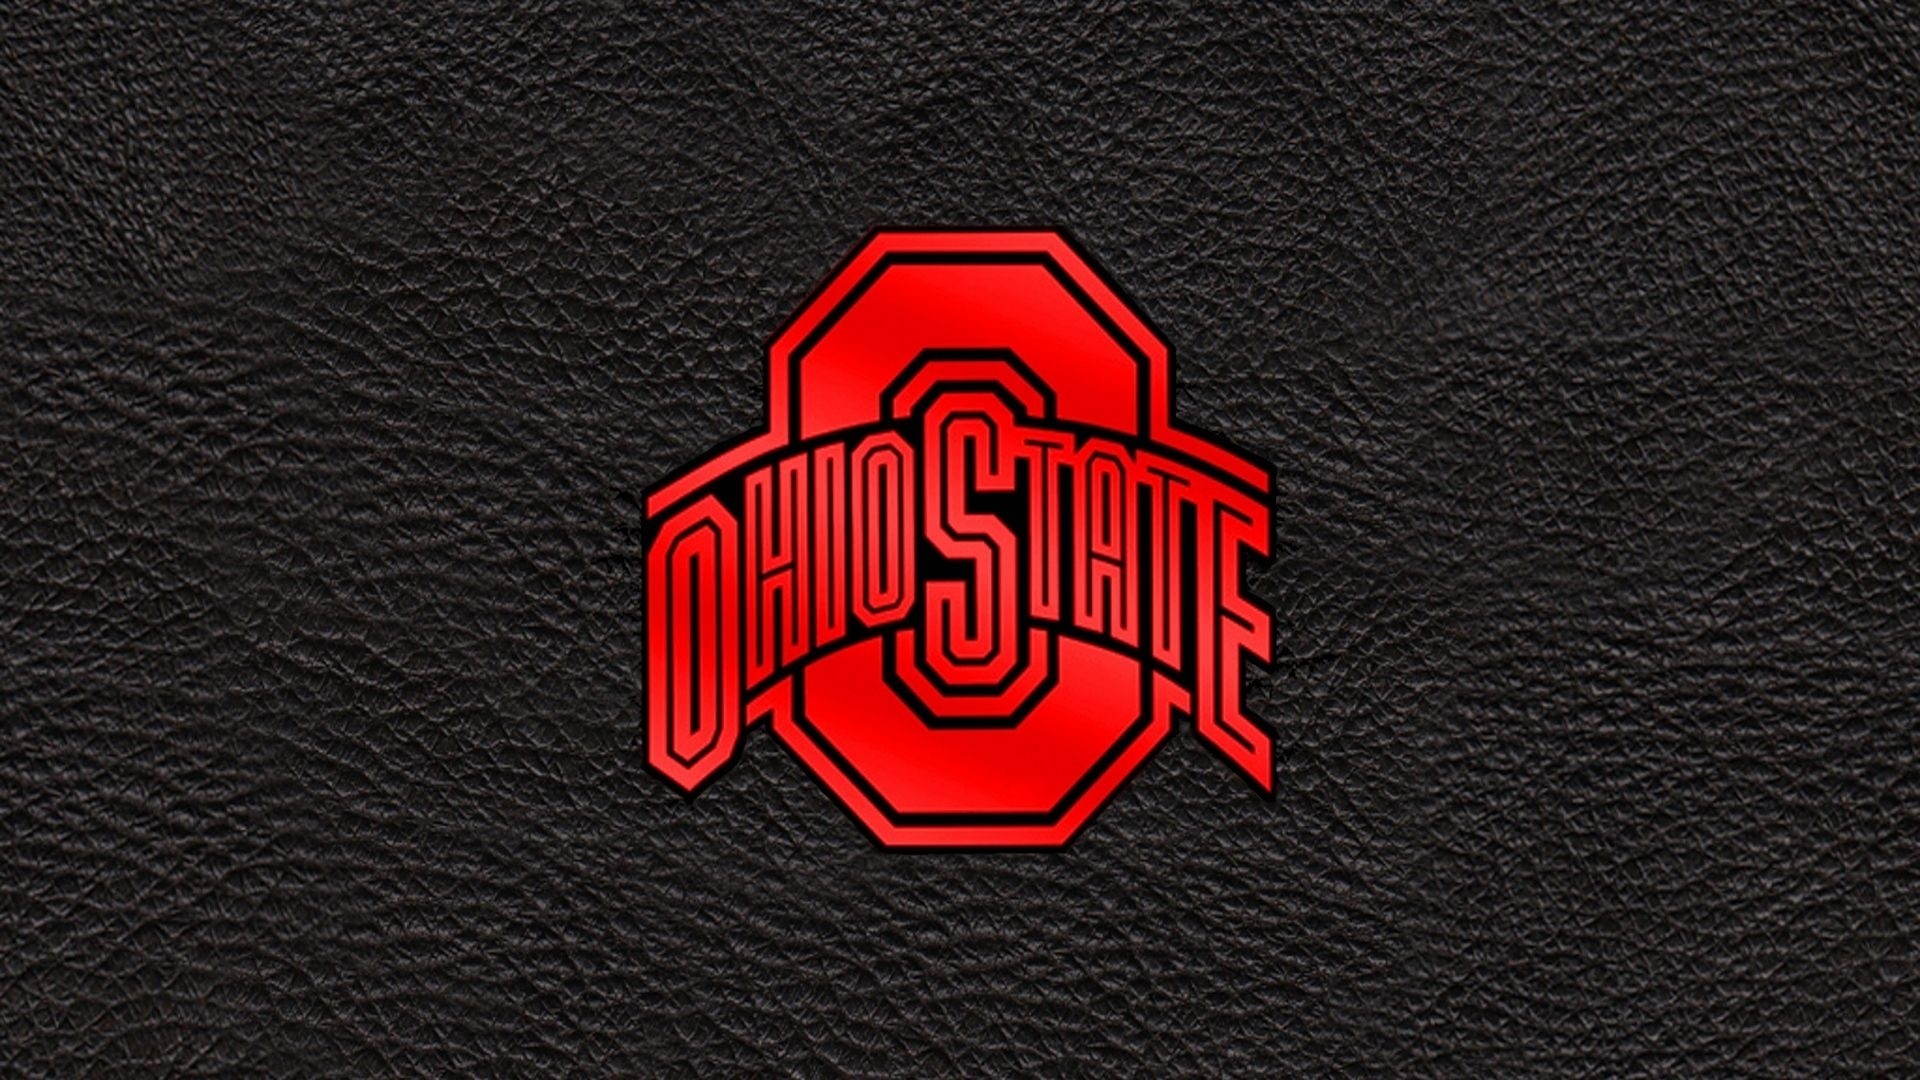 1920x1080 10 Best Ohio State Football Wallpaper Hd FULL HD 1080p For PC Background ...